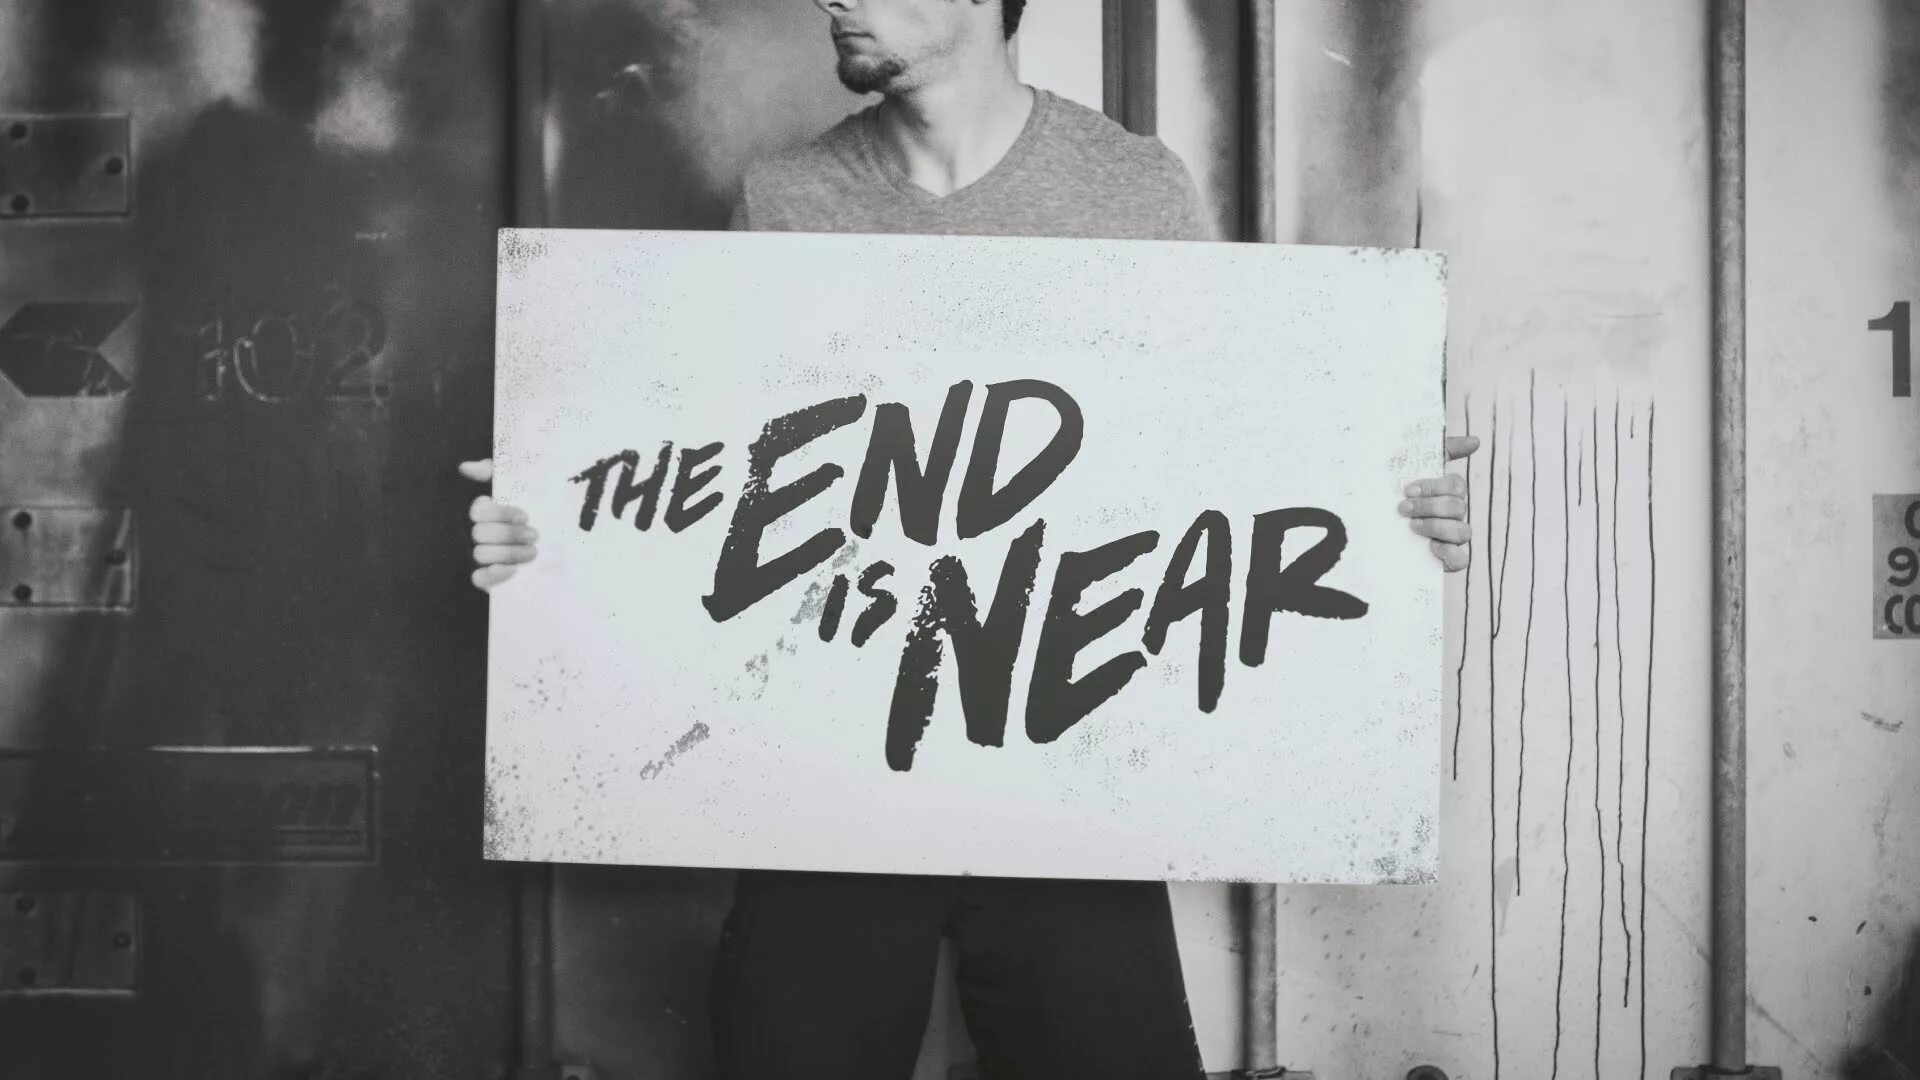 The end is near votv. Гомер the end is near. The end. Симпсоны the end is near.